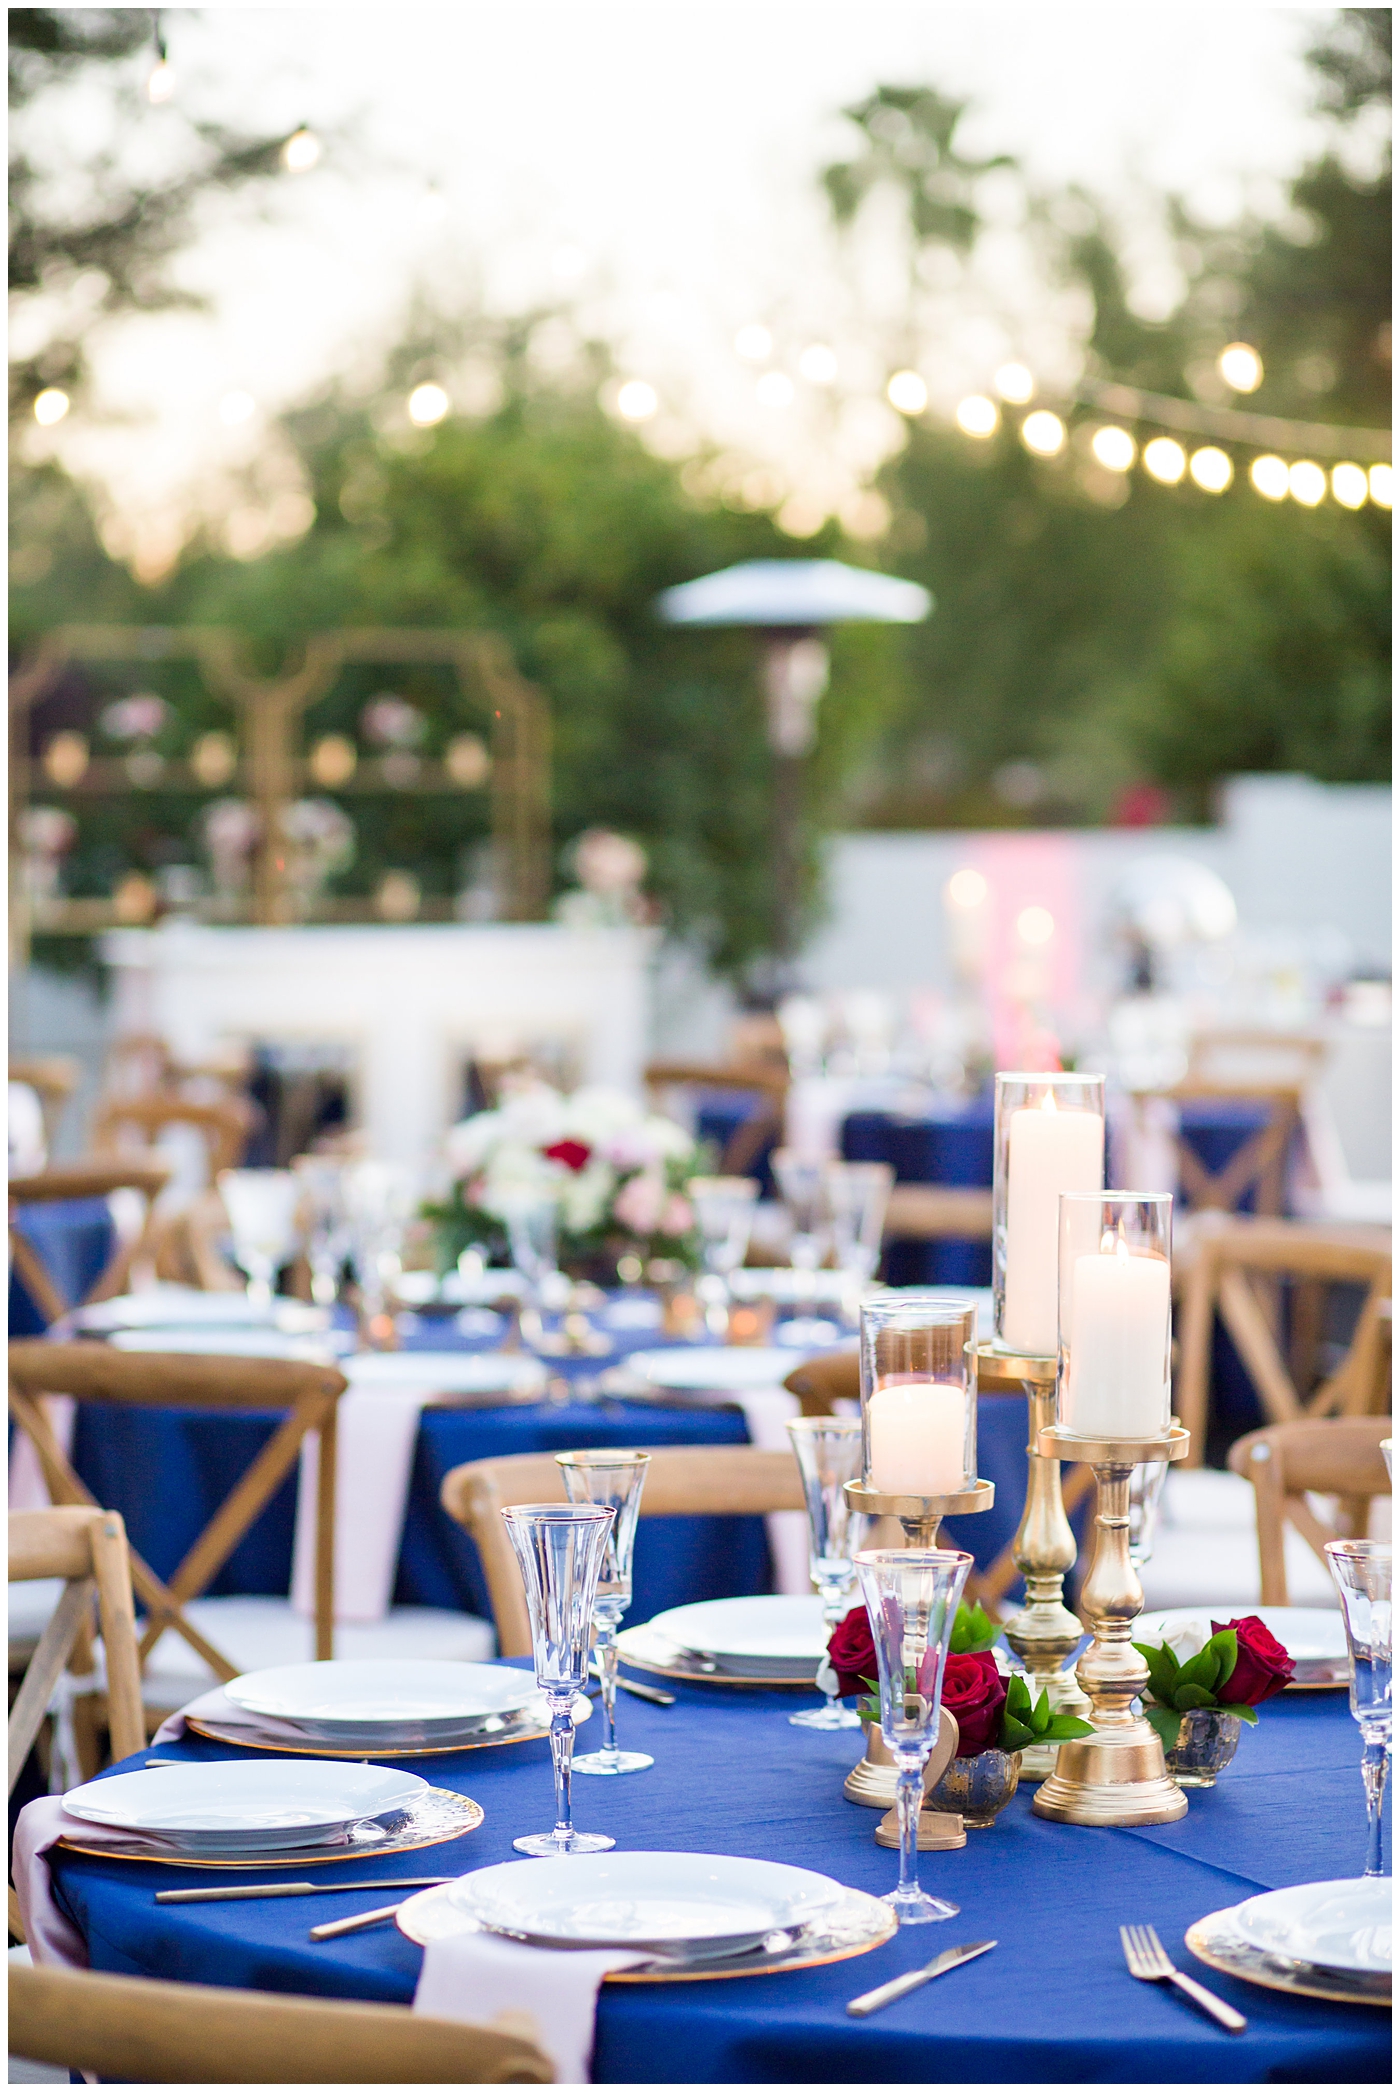 reception details tables with blue linens, gold table numbers and candles with white and red rose centerpieces